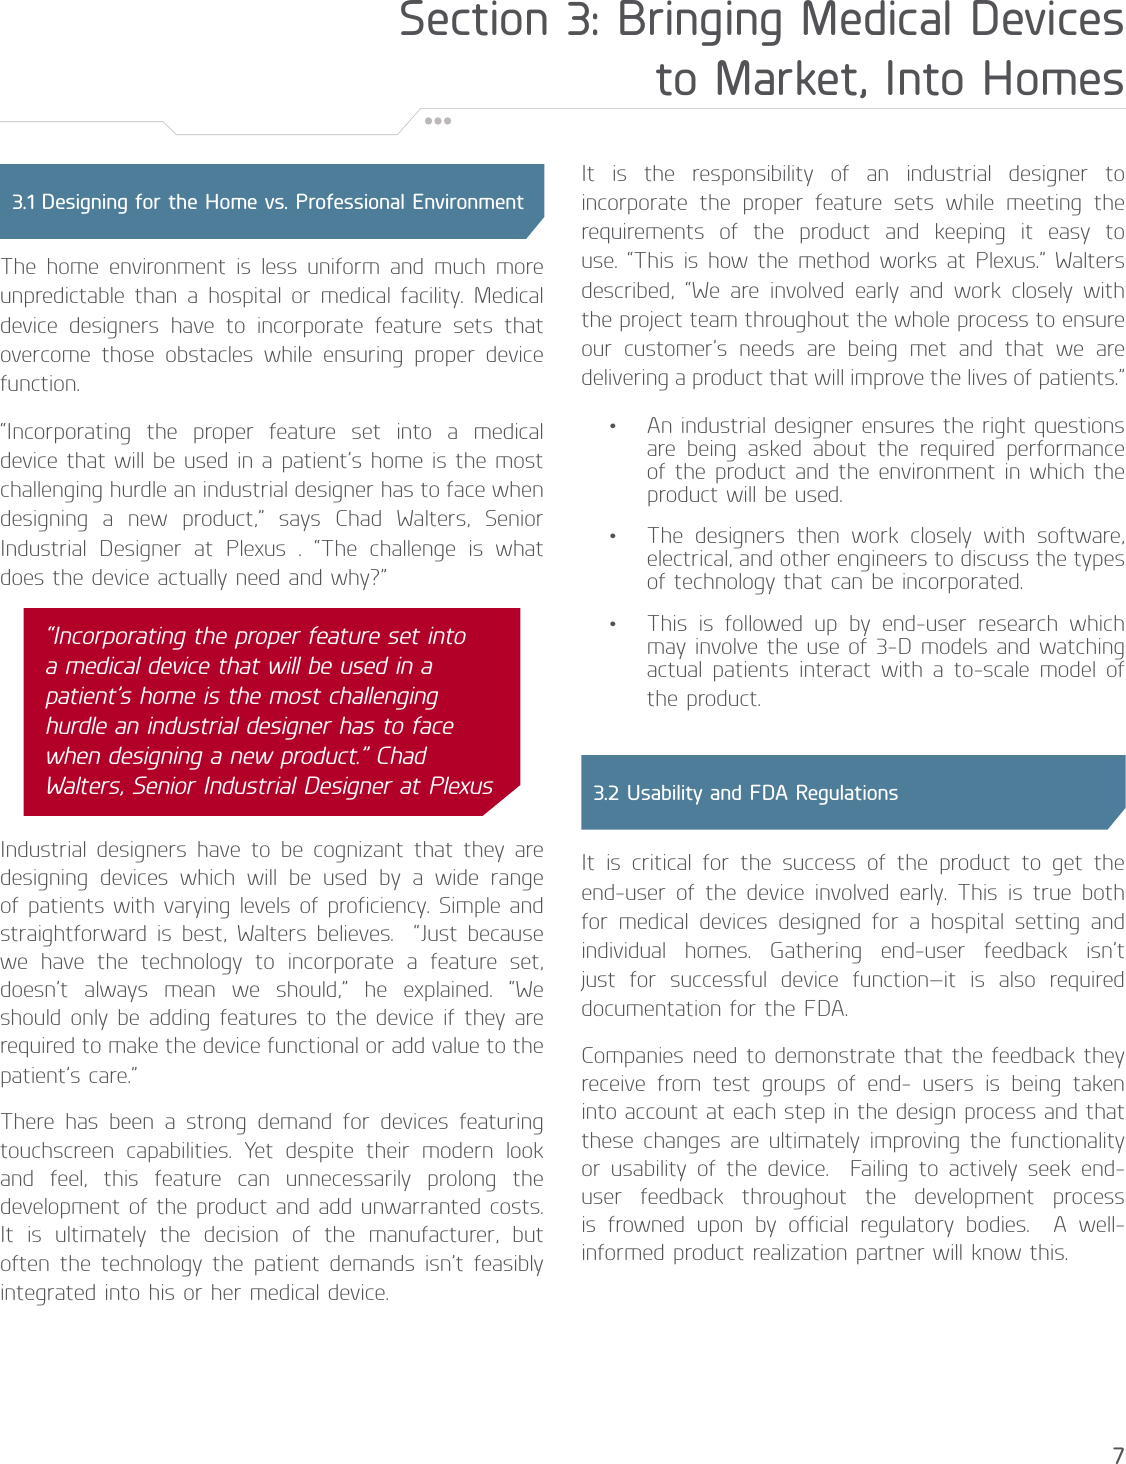 Page 9 of 12 - Addressing-the-challenges-of-home-medical-devices